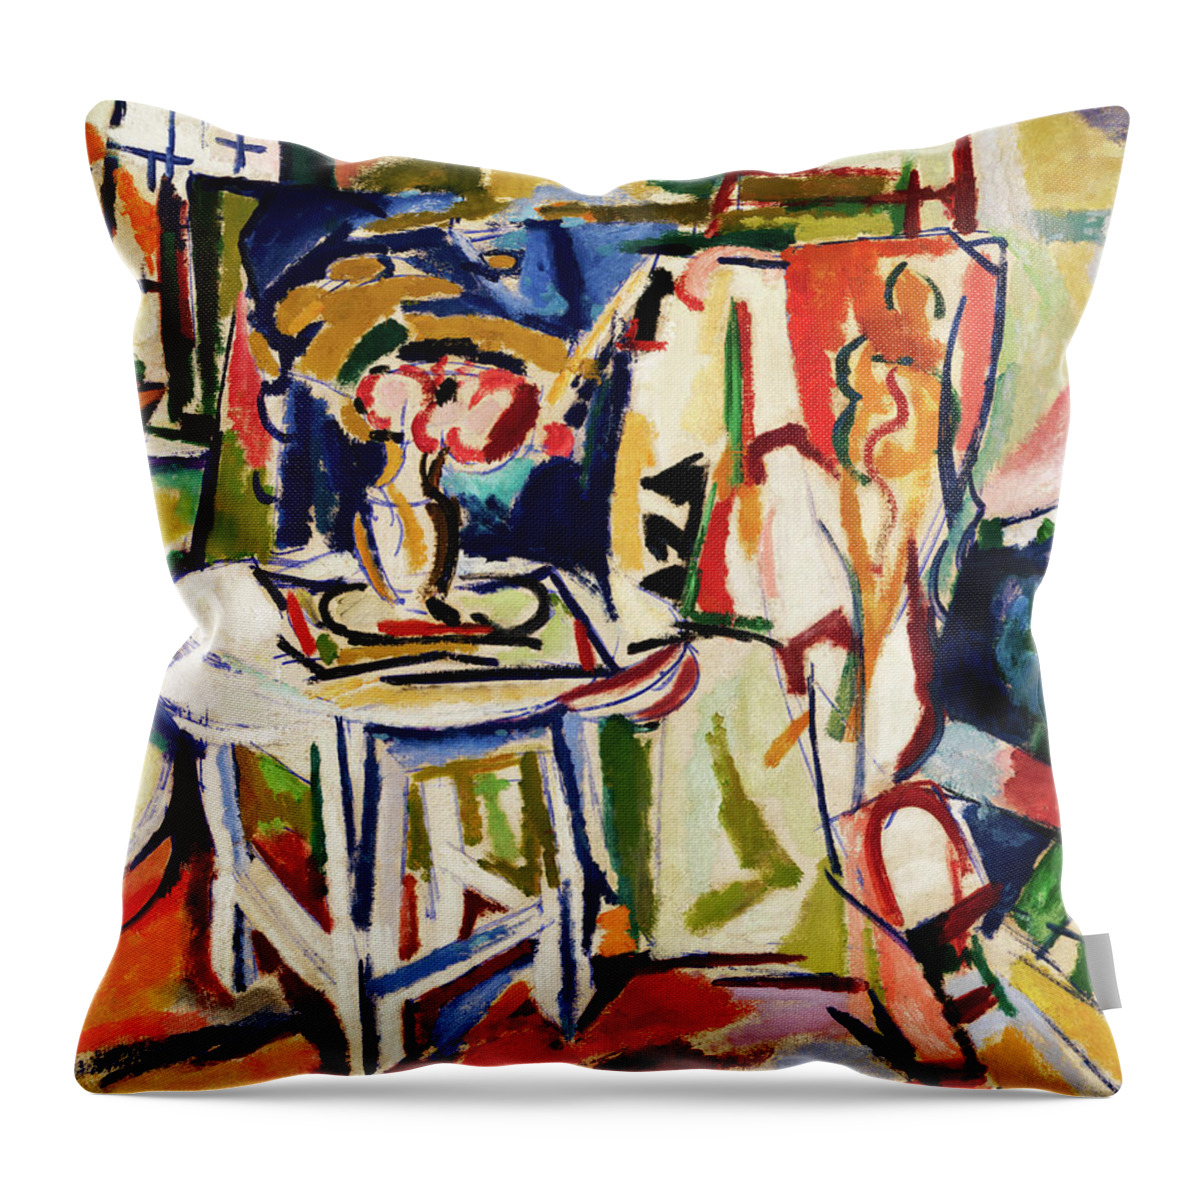 Museum Throw Pillow featuring the painting Interior by Henry Lyman Sayen